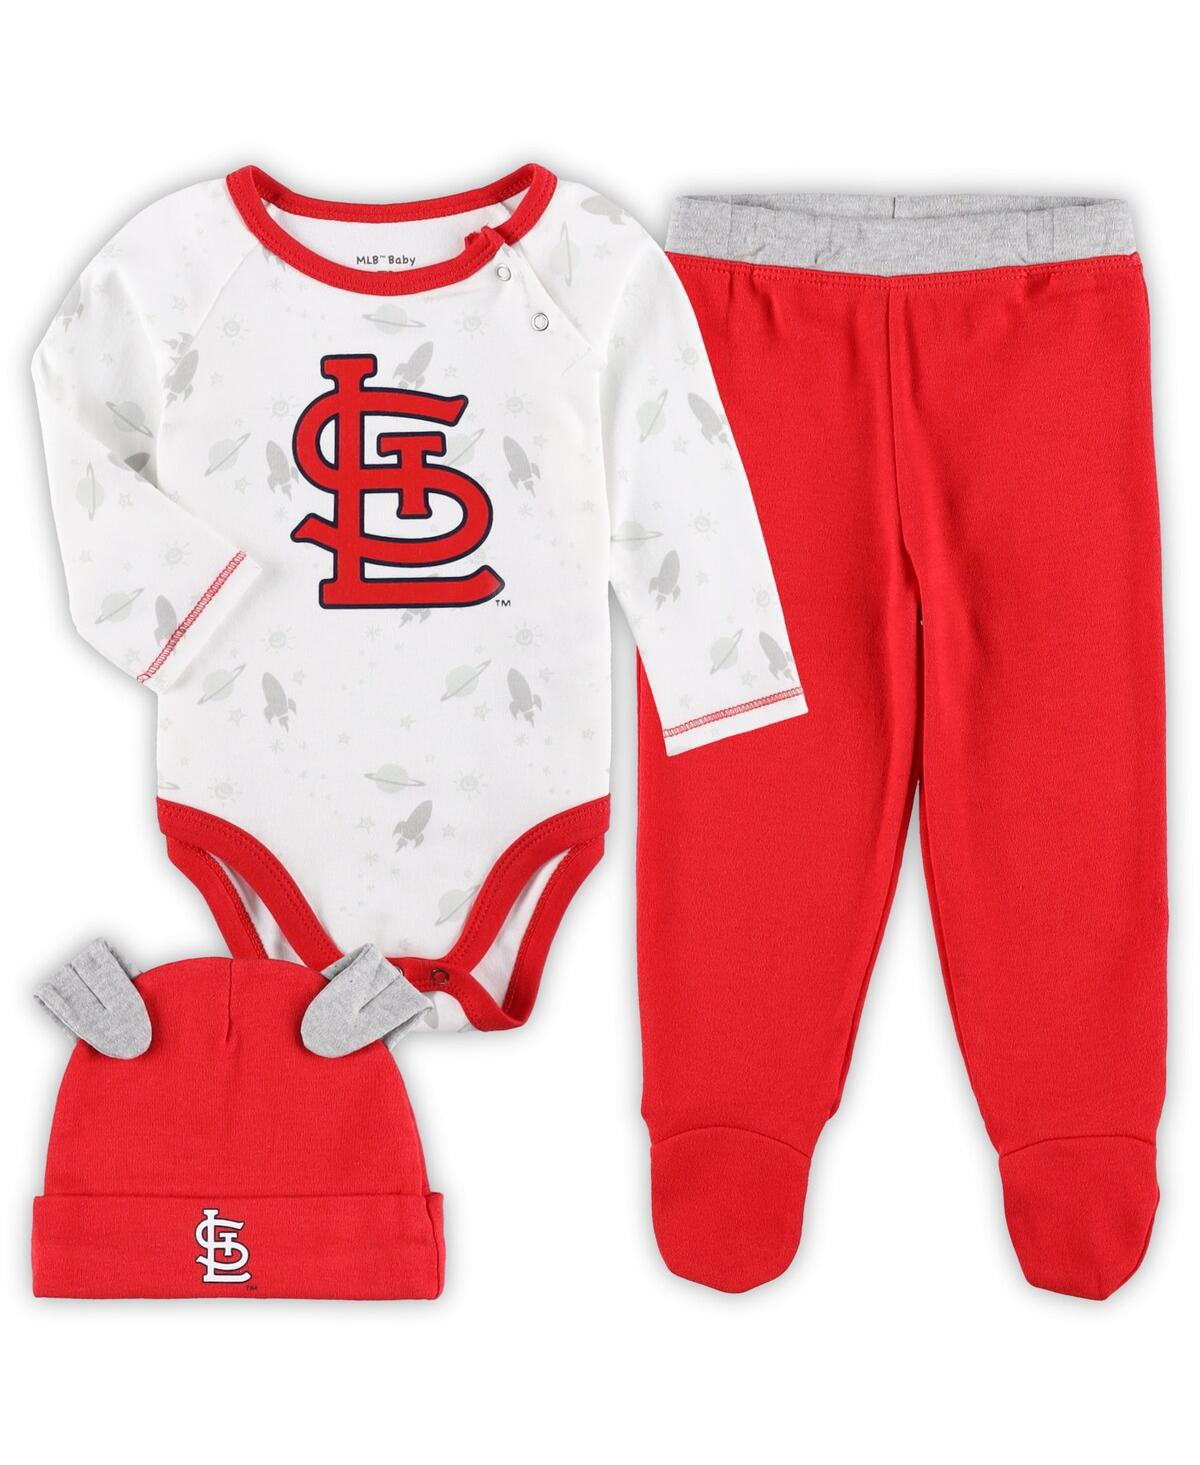 Shop Outerstuff Newborn And Infant Boys And Girls Red, White St. Louis Cardinals Dream Team Bodysuit Hat And Footed  In Red,white